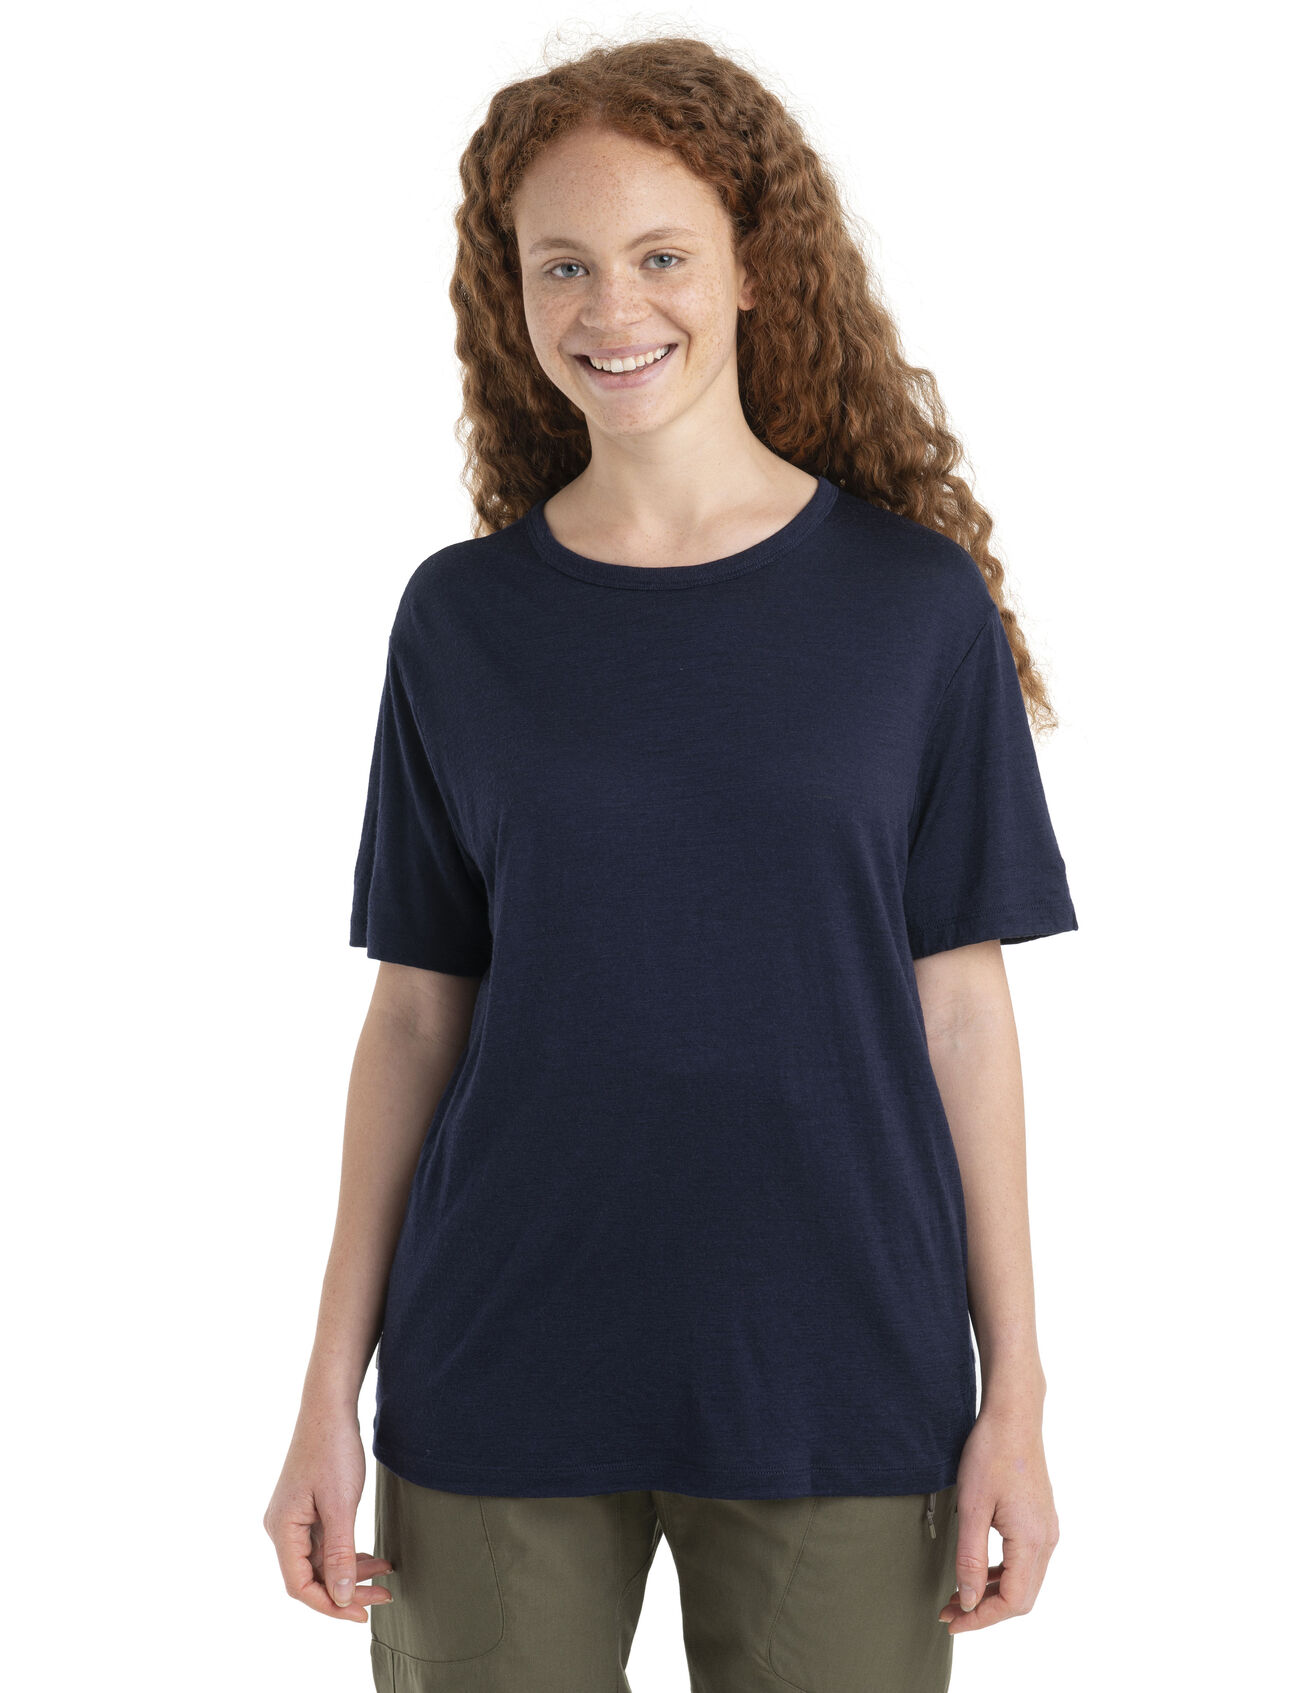 Womens Merino Granary Short Sleeve T-Shirt A classic tee with a relaxed fit and soft, breathable, 100% merino wool fabric, the Granary Short Sleeve Tee is all about everyday comfort and style.